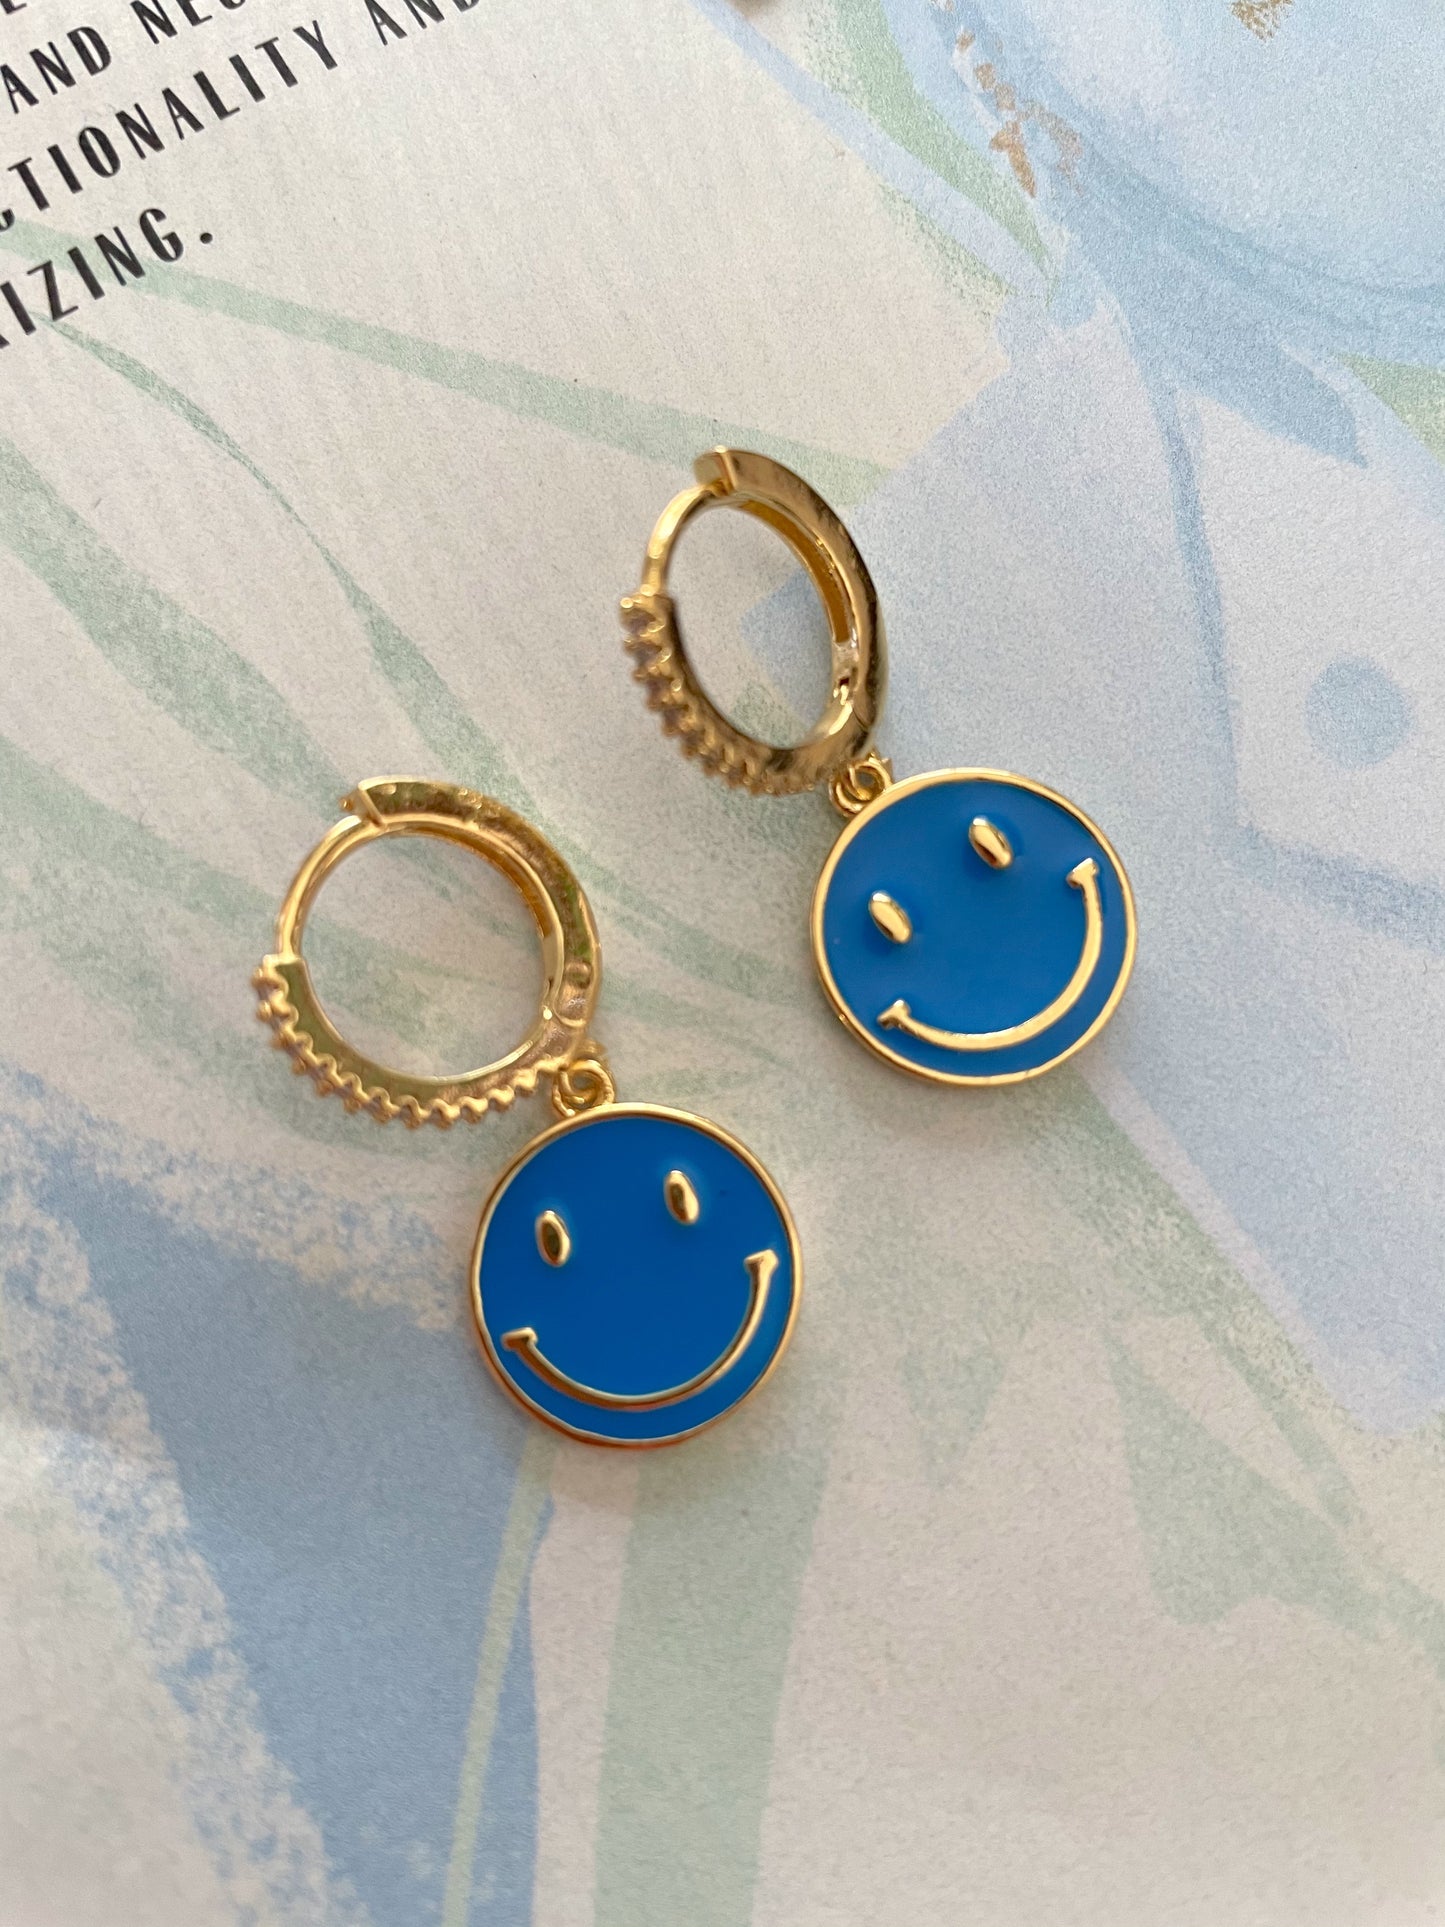 Colored Happy Face earrings